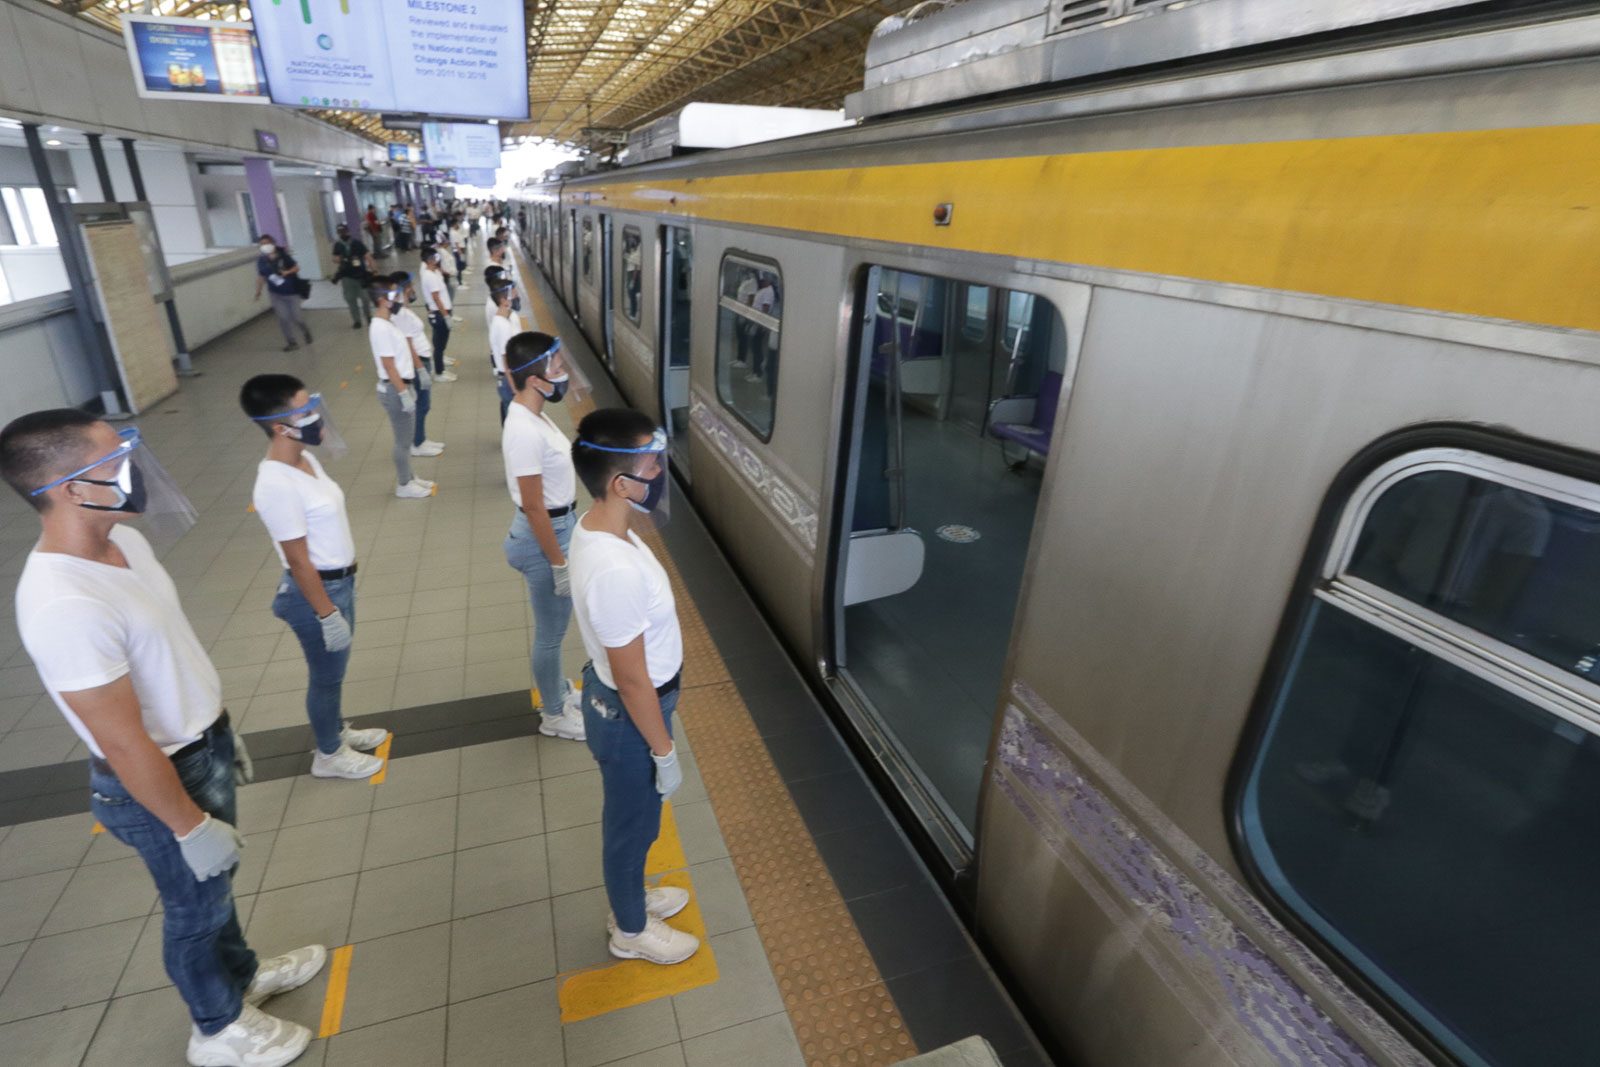 Buses to make up for reduced train capacity in Metro Manila – Tugade